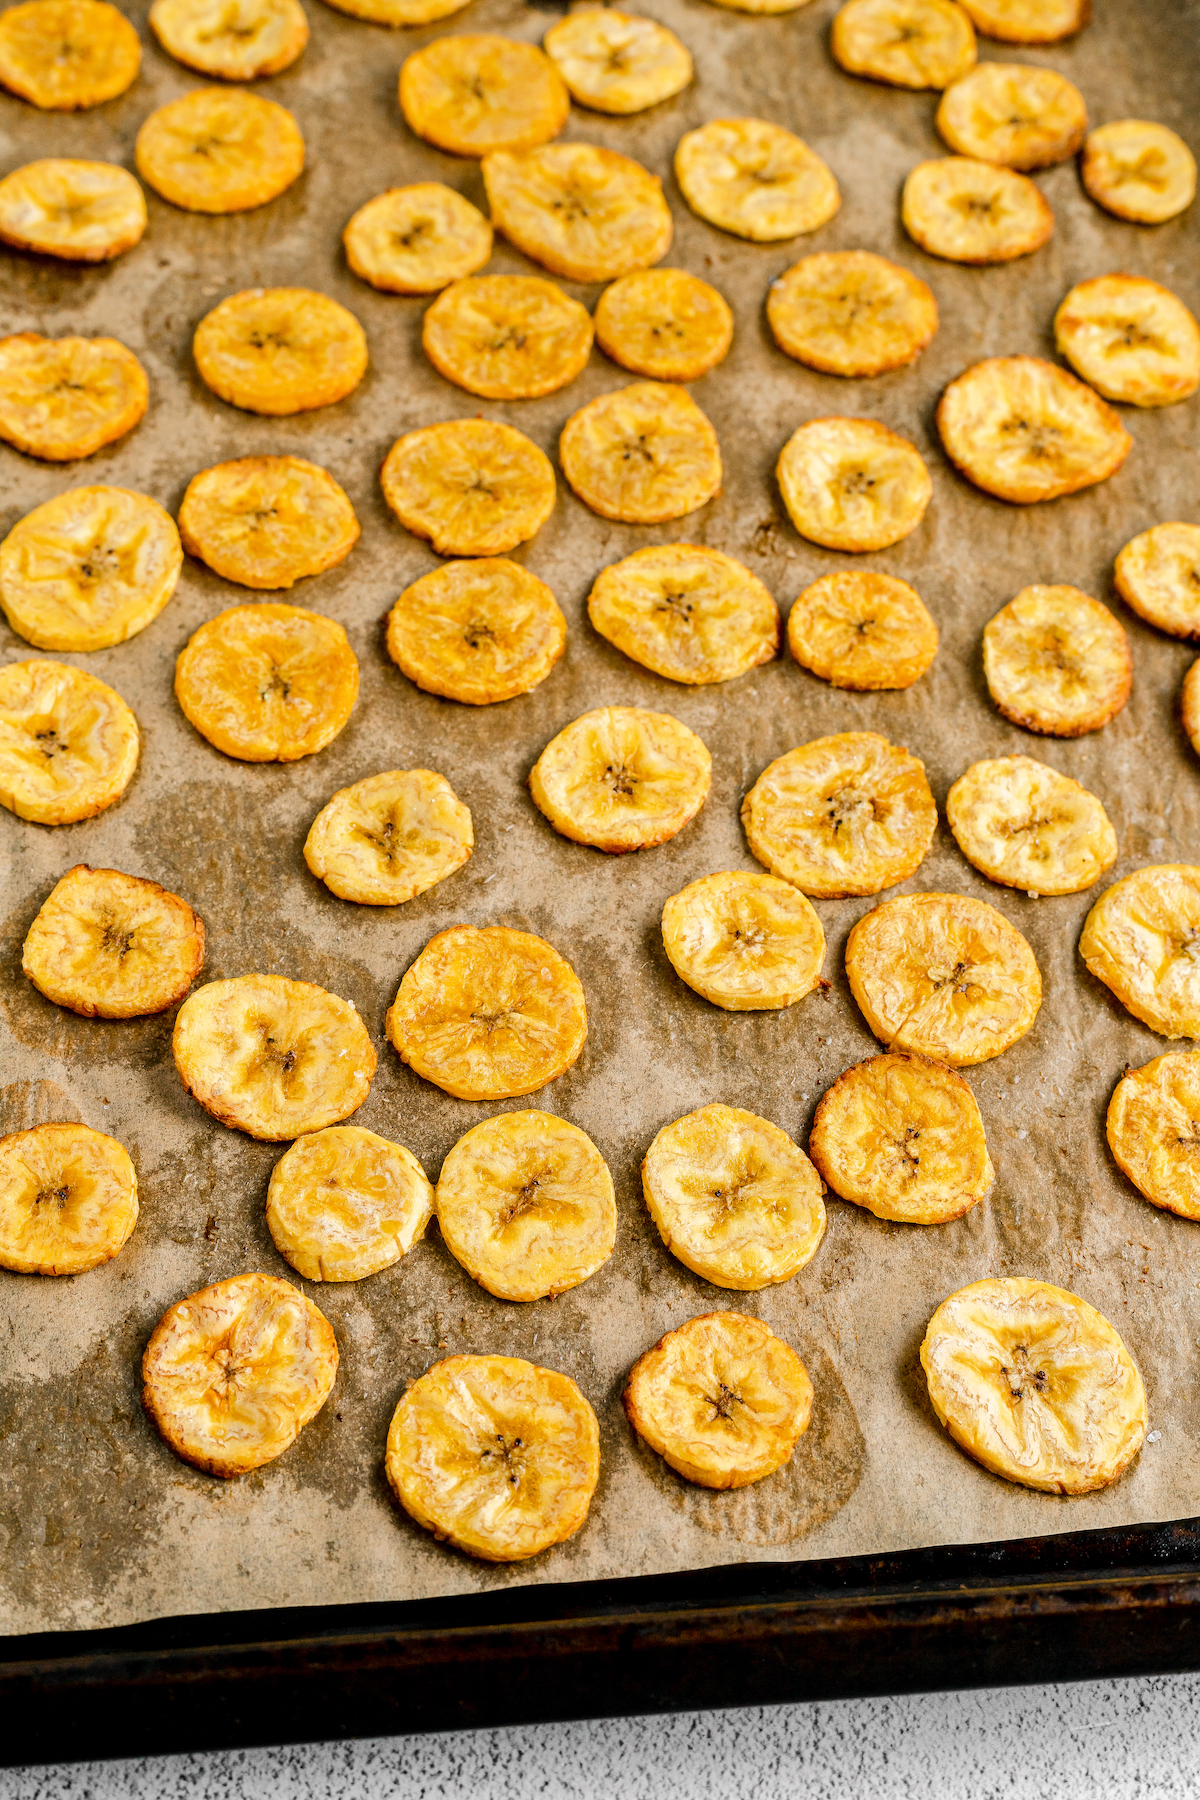 Sliced, baked plantains on a baking sheet.